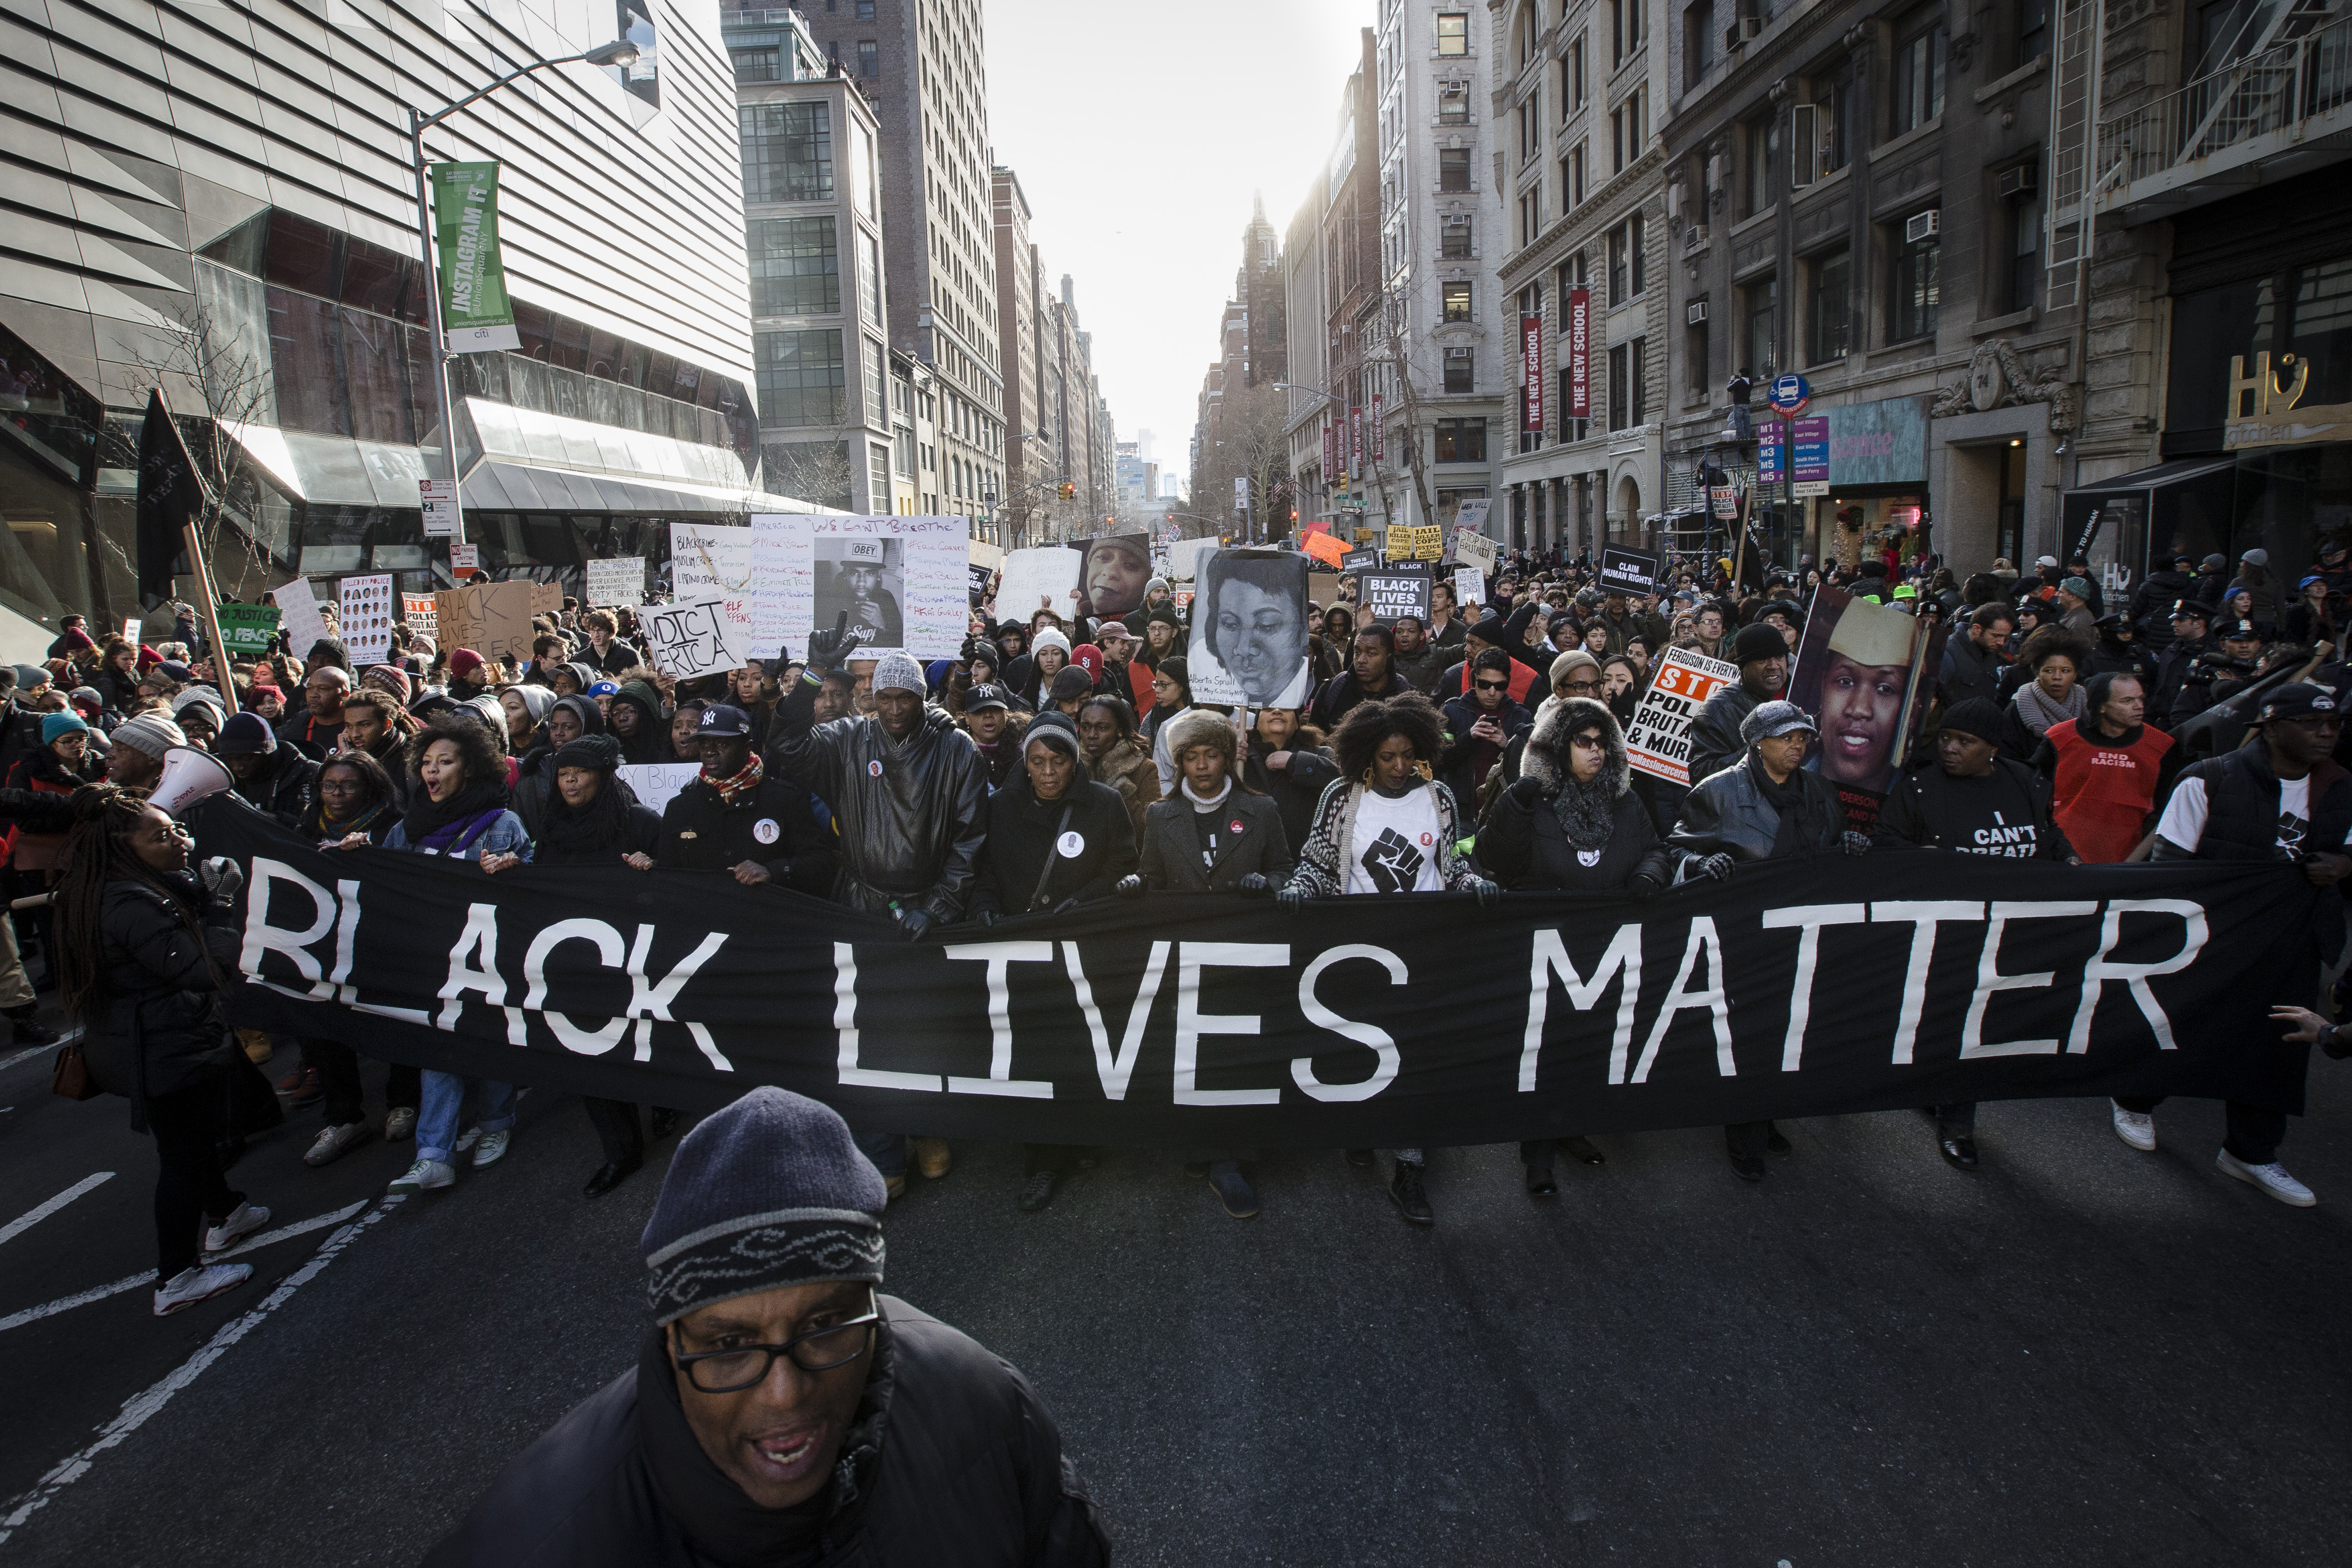 Demonstrators march in New York, Saturday, Dec. 13, 2014, during the Justice for All rally and march. In the past three weeks, grand juries have decided not to indict officers in the chokehold death of Eric Garner in New York and the fatal shooting of Michael Brown in Ferguson, Mo. The decisions have unleashed demonstrations and questions about police conduct and whether local prosecutors are the best choice for investigating police. (John Minchillo—AP)